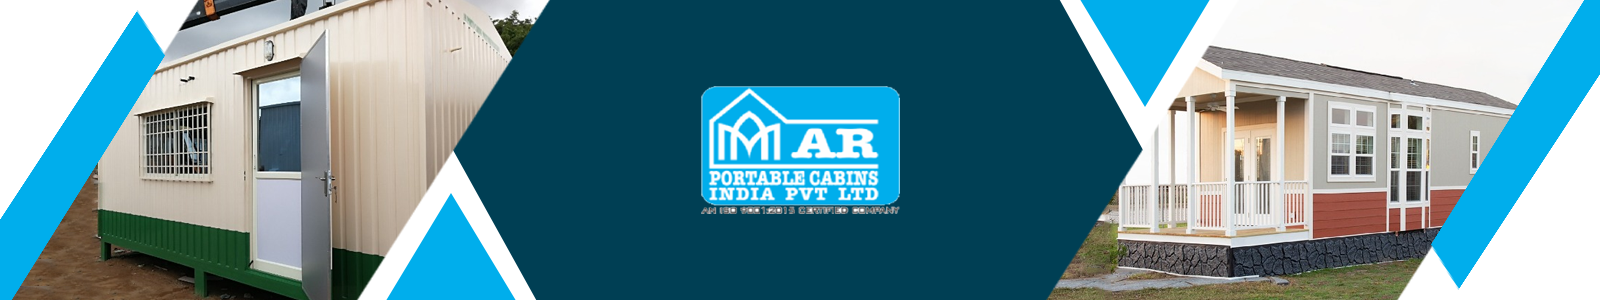 AR Portable Cabins India Private Limited